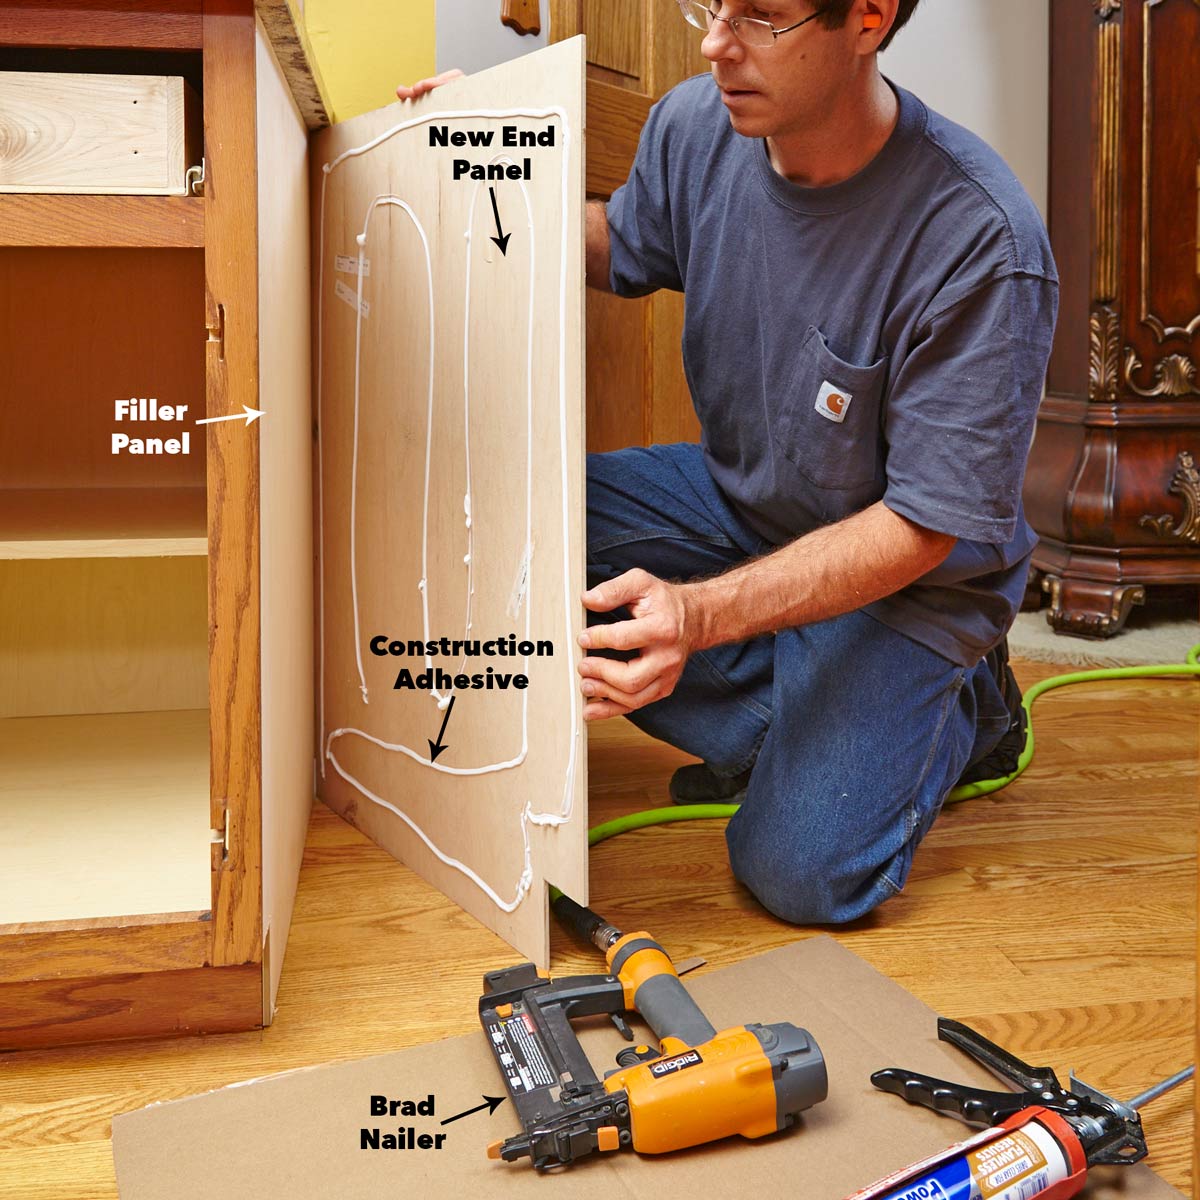 Attaching veneer panel to cabinet side | Woodworking Talk